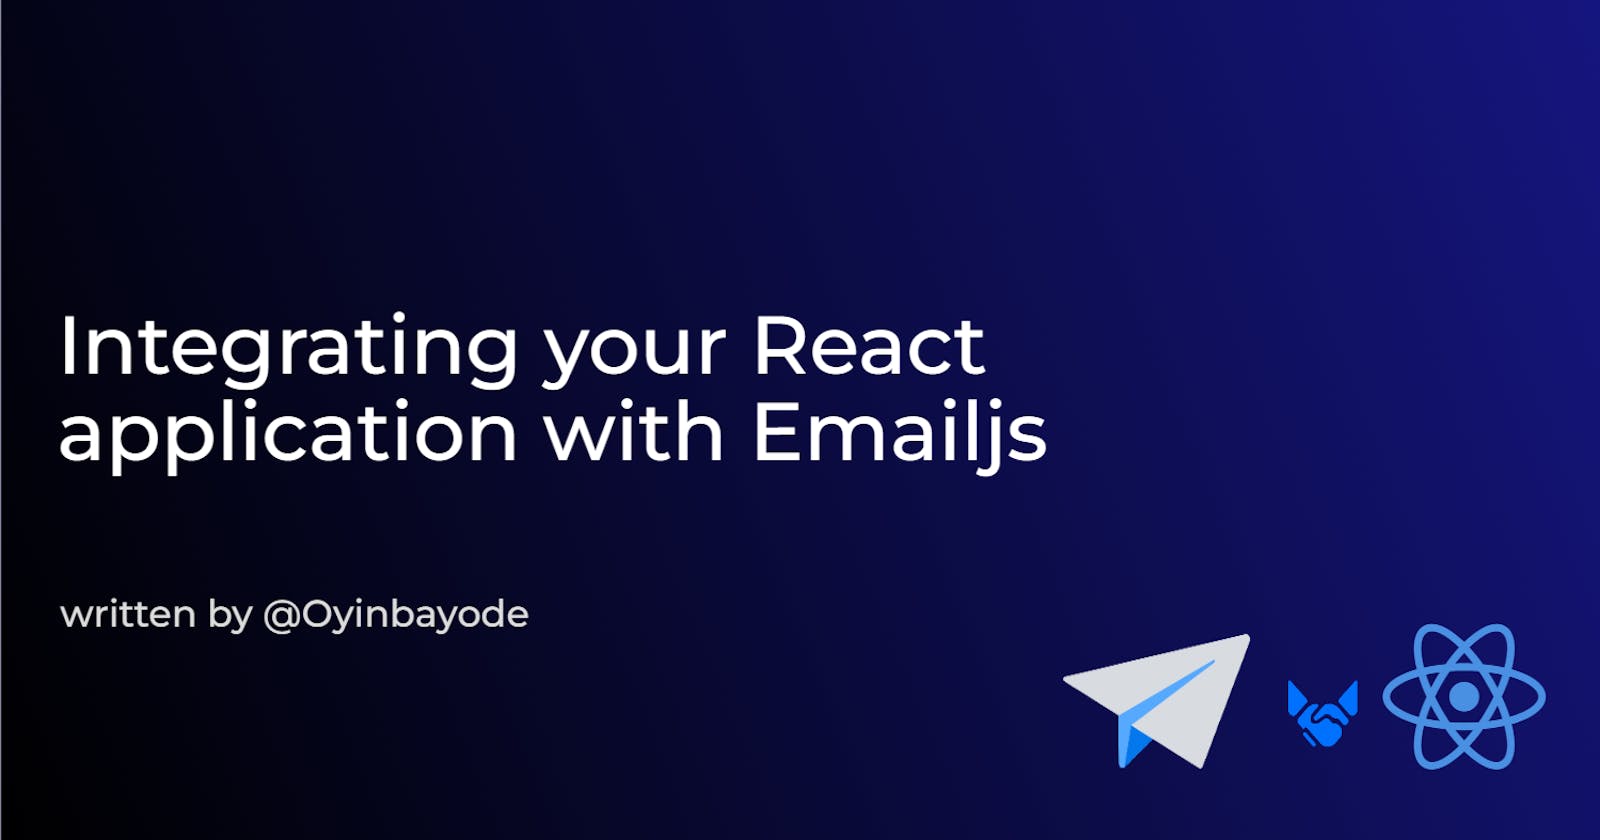 Integrating your React application with Emailjs